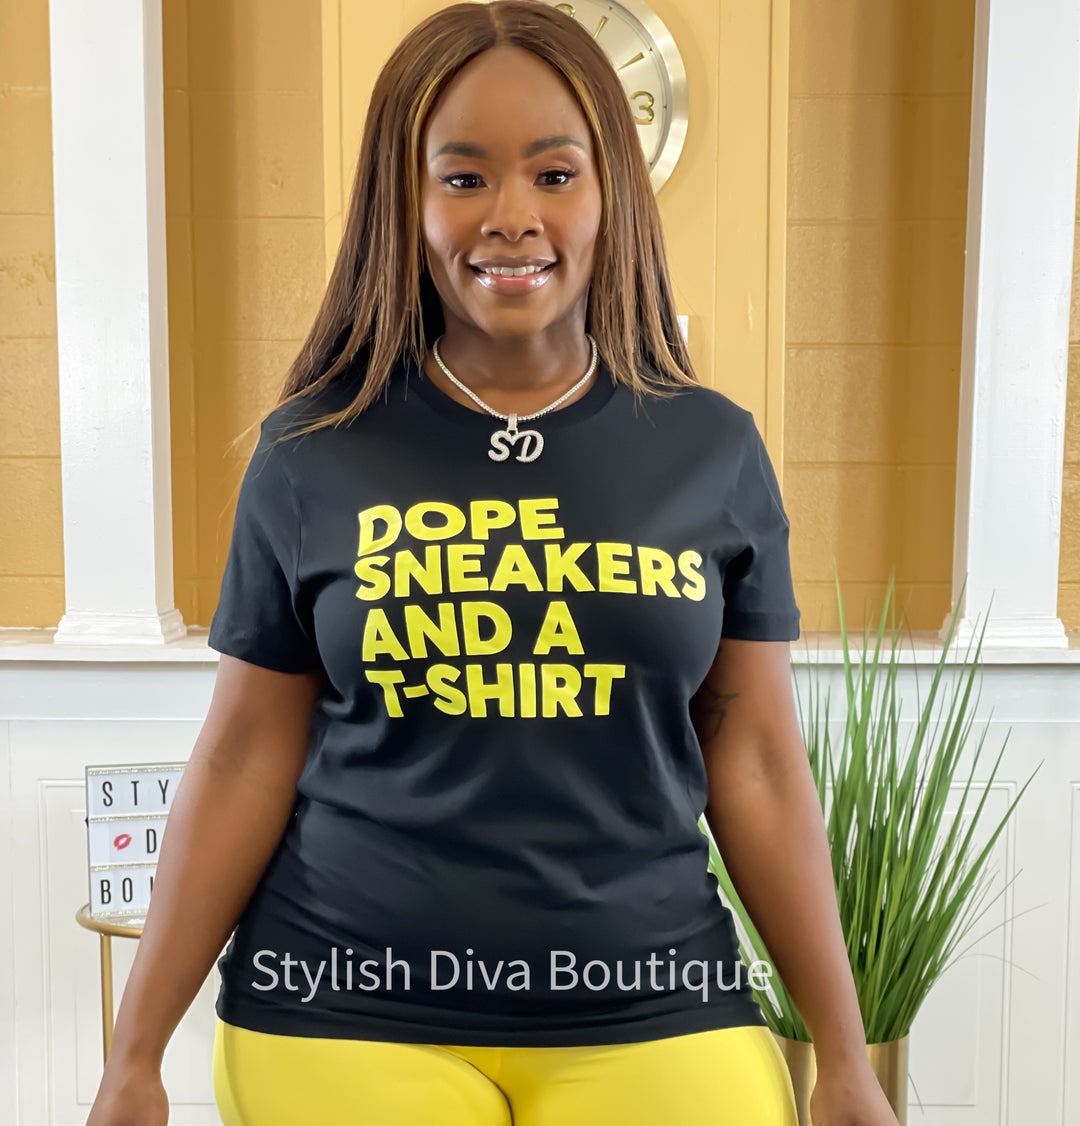 Let at ske privatliv fødselsdag Dope Sneakers and T-Shirt (Black/Yellow Print) – Stylish Diva Boutique